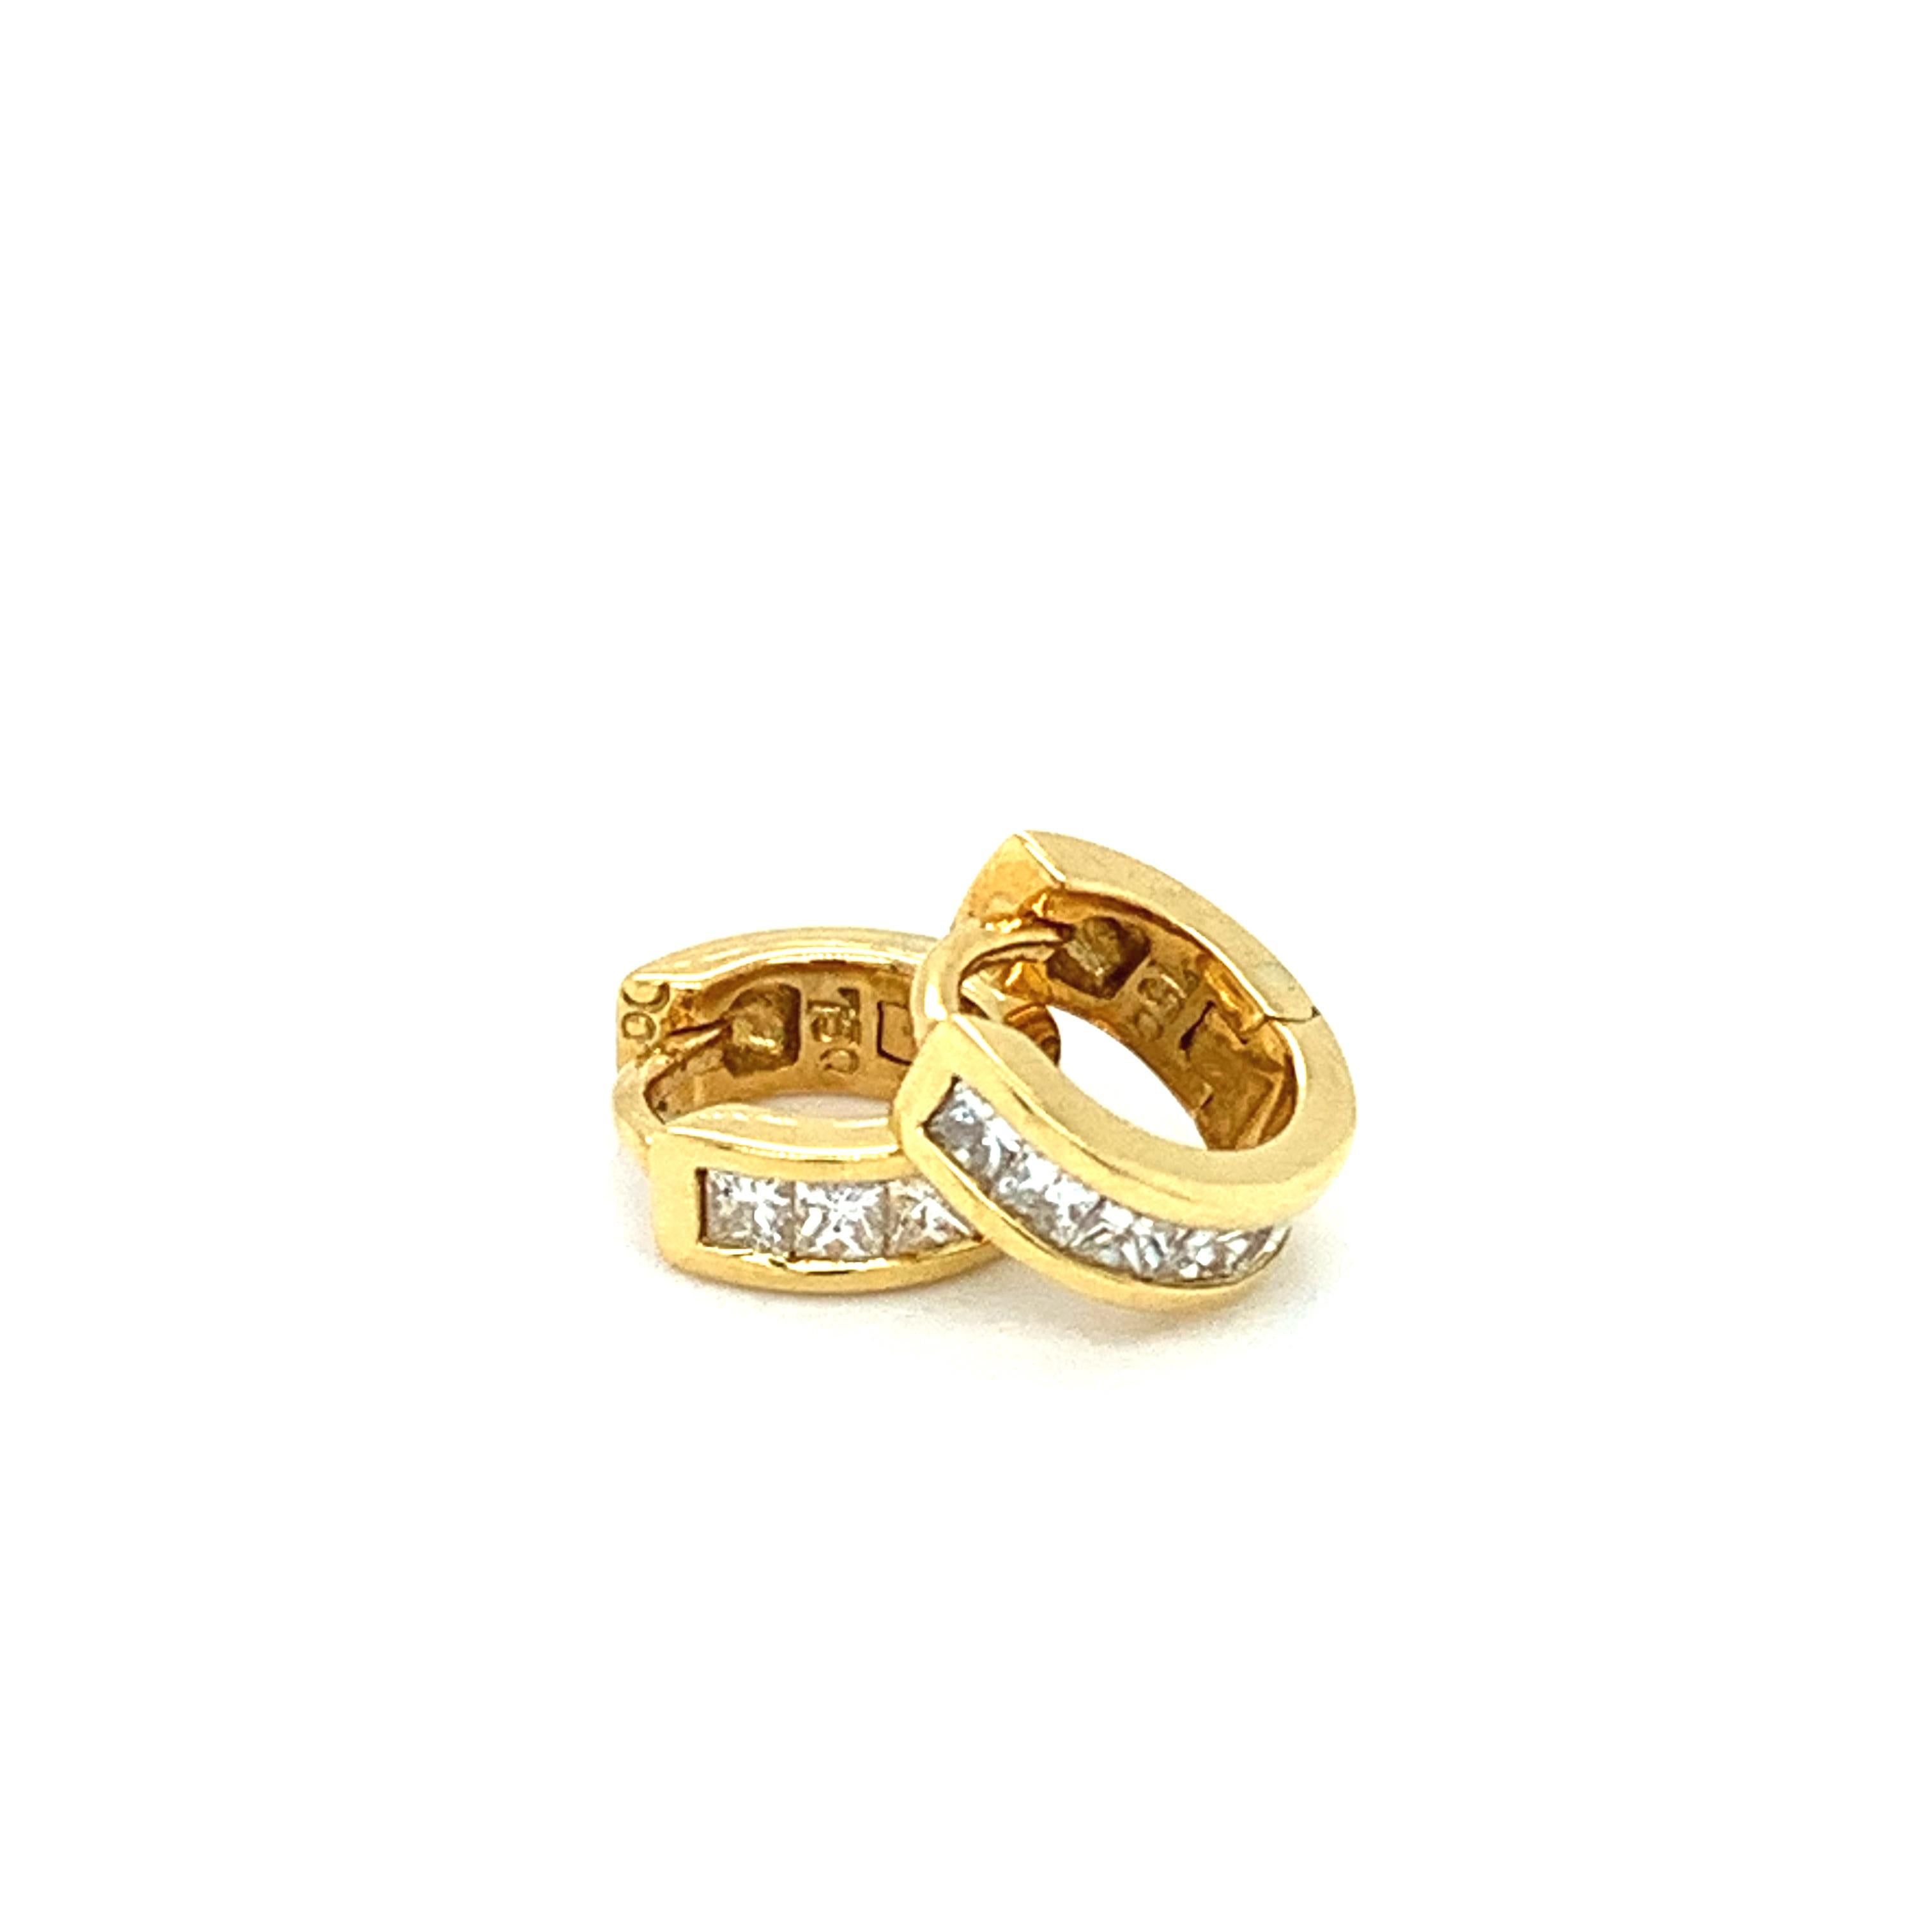 Diamond small hoop earrings 18k yellow gold
Small eternity princess cut diamond hoop earrings clip on post settings
Hallmarked
Diamond princess shaped total weight F colour VS1 clarity 
Measurements width approx 10mm. thickness 3mm
Accompanied with